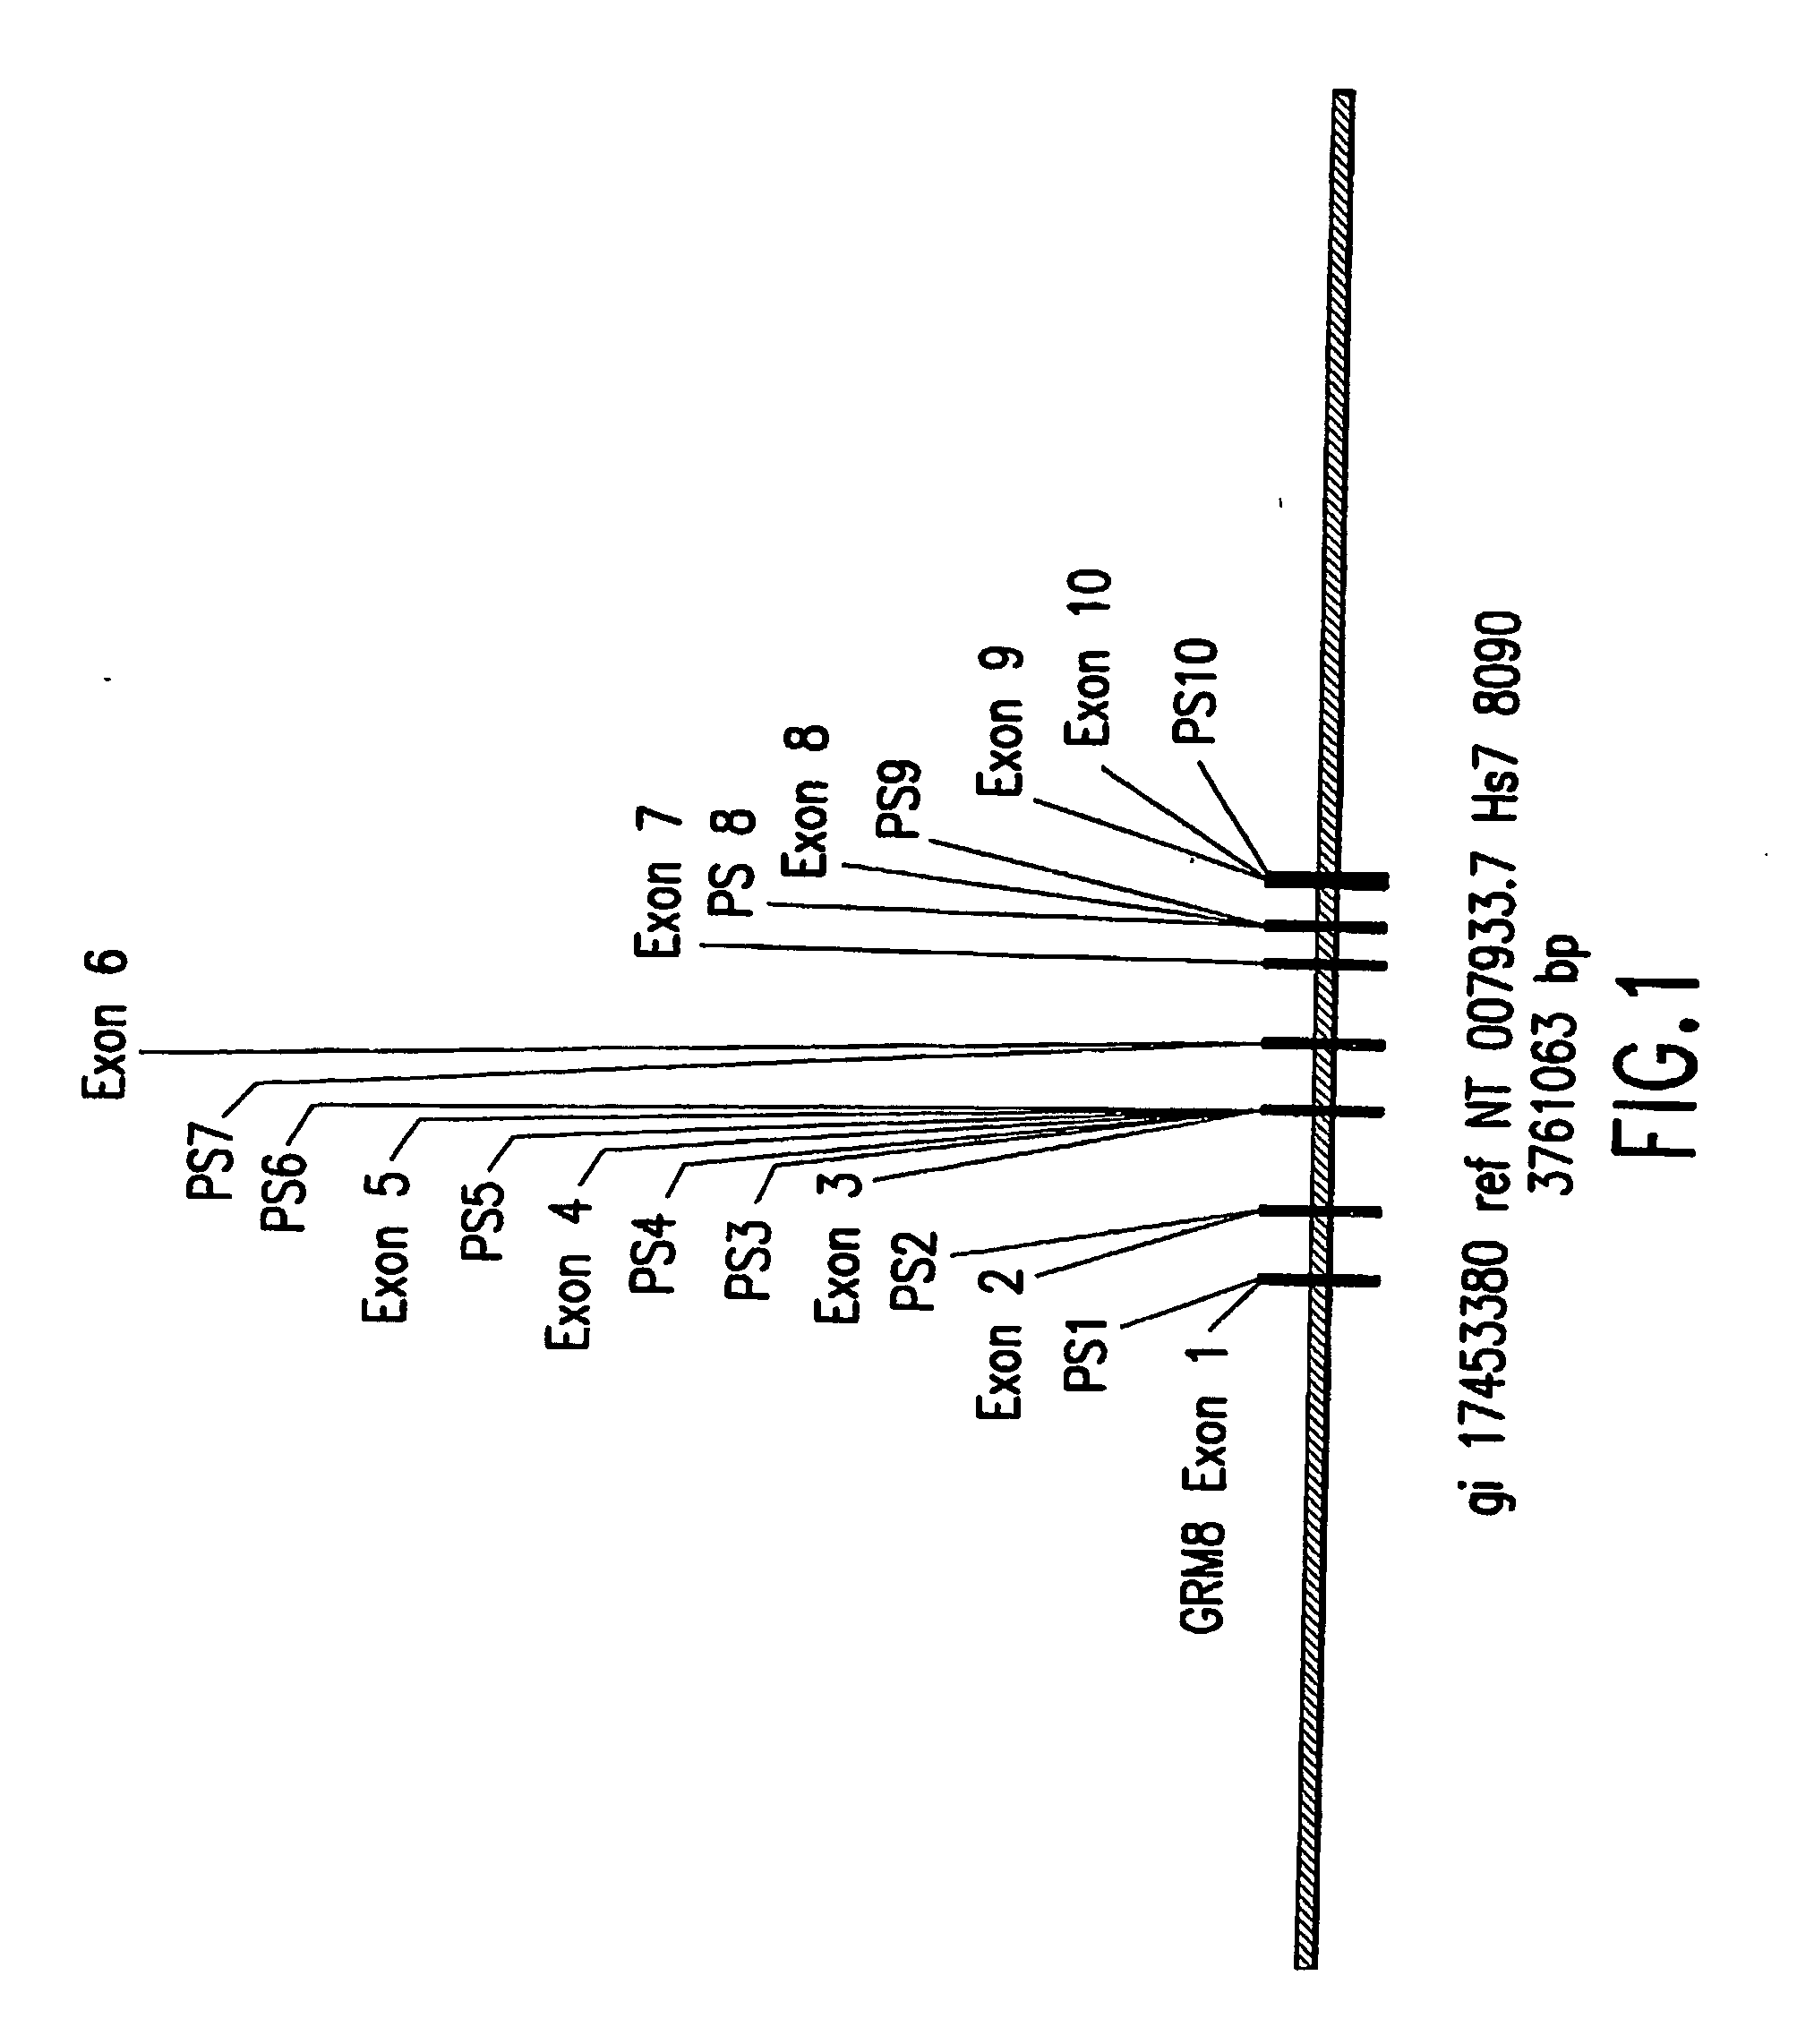 Identification of novel polymorphic sites in the human mglur8 gene and uses thereof